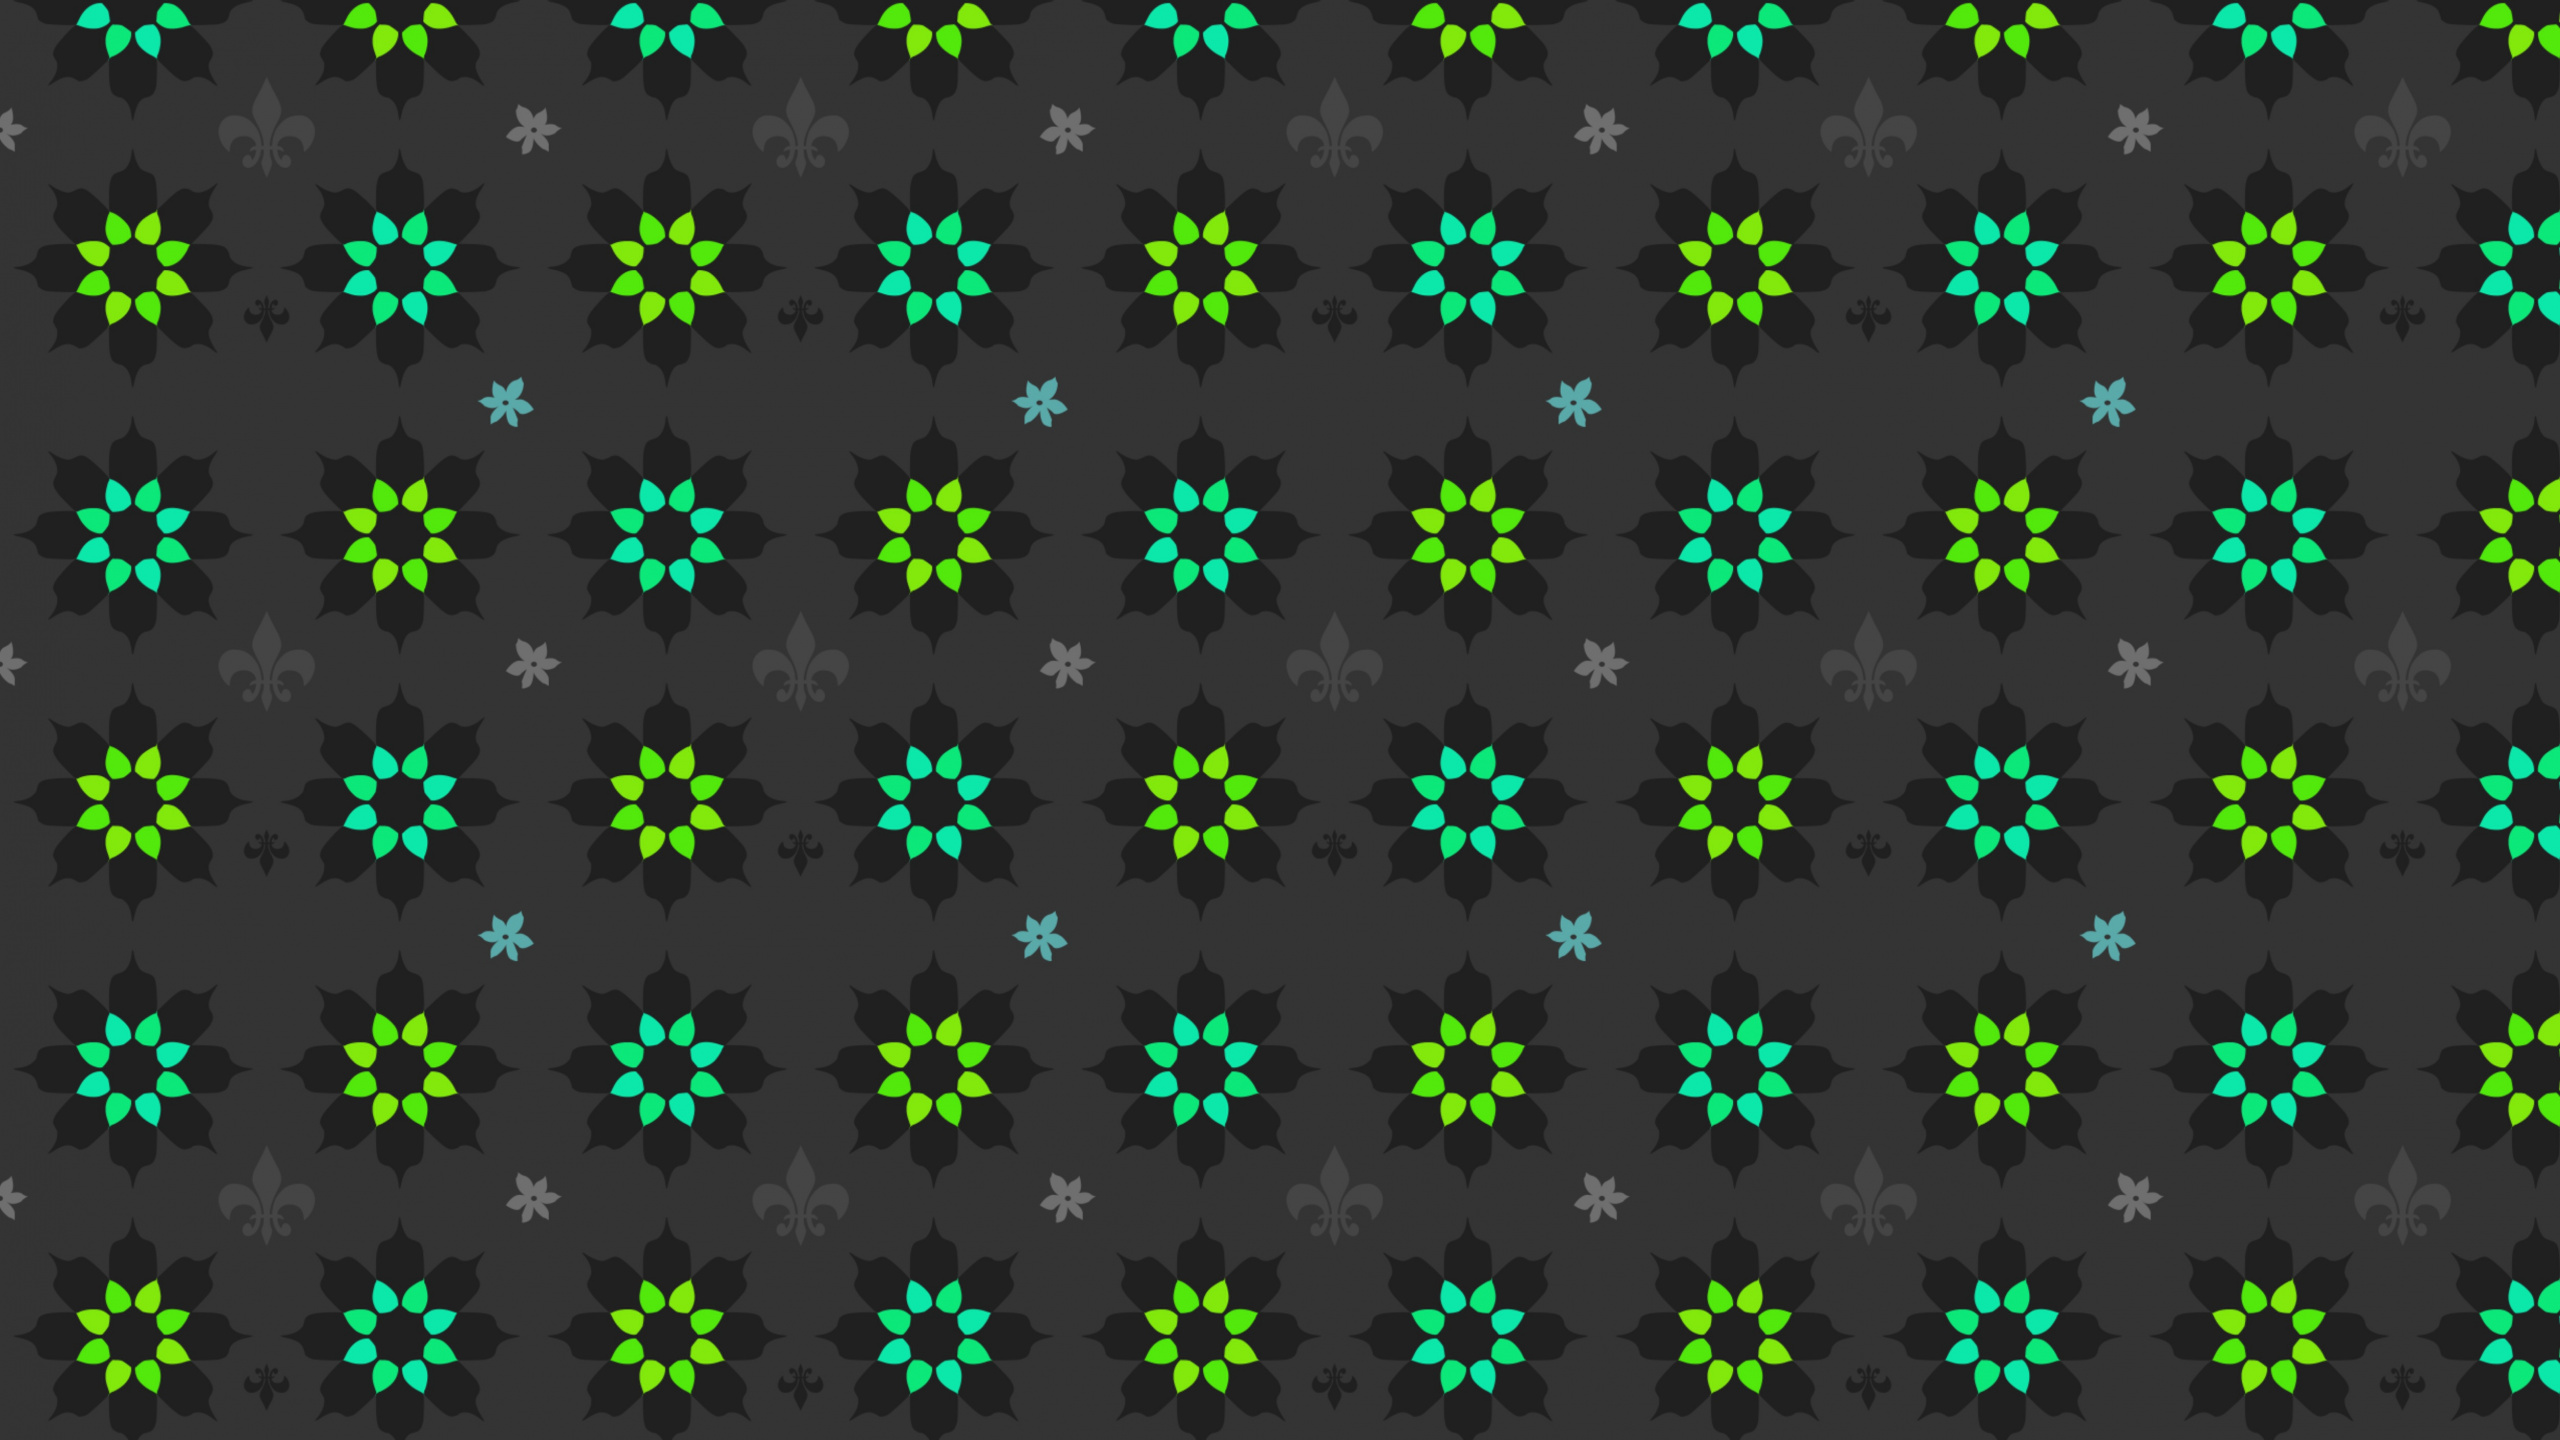 Black and White Star Print Textile. Wallpaper in 2560x1440 Resolution